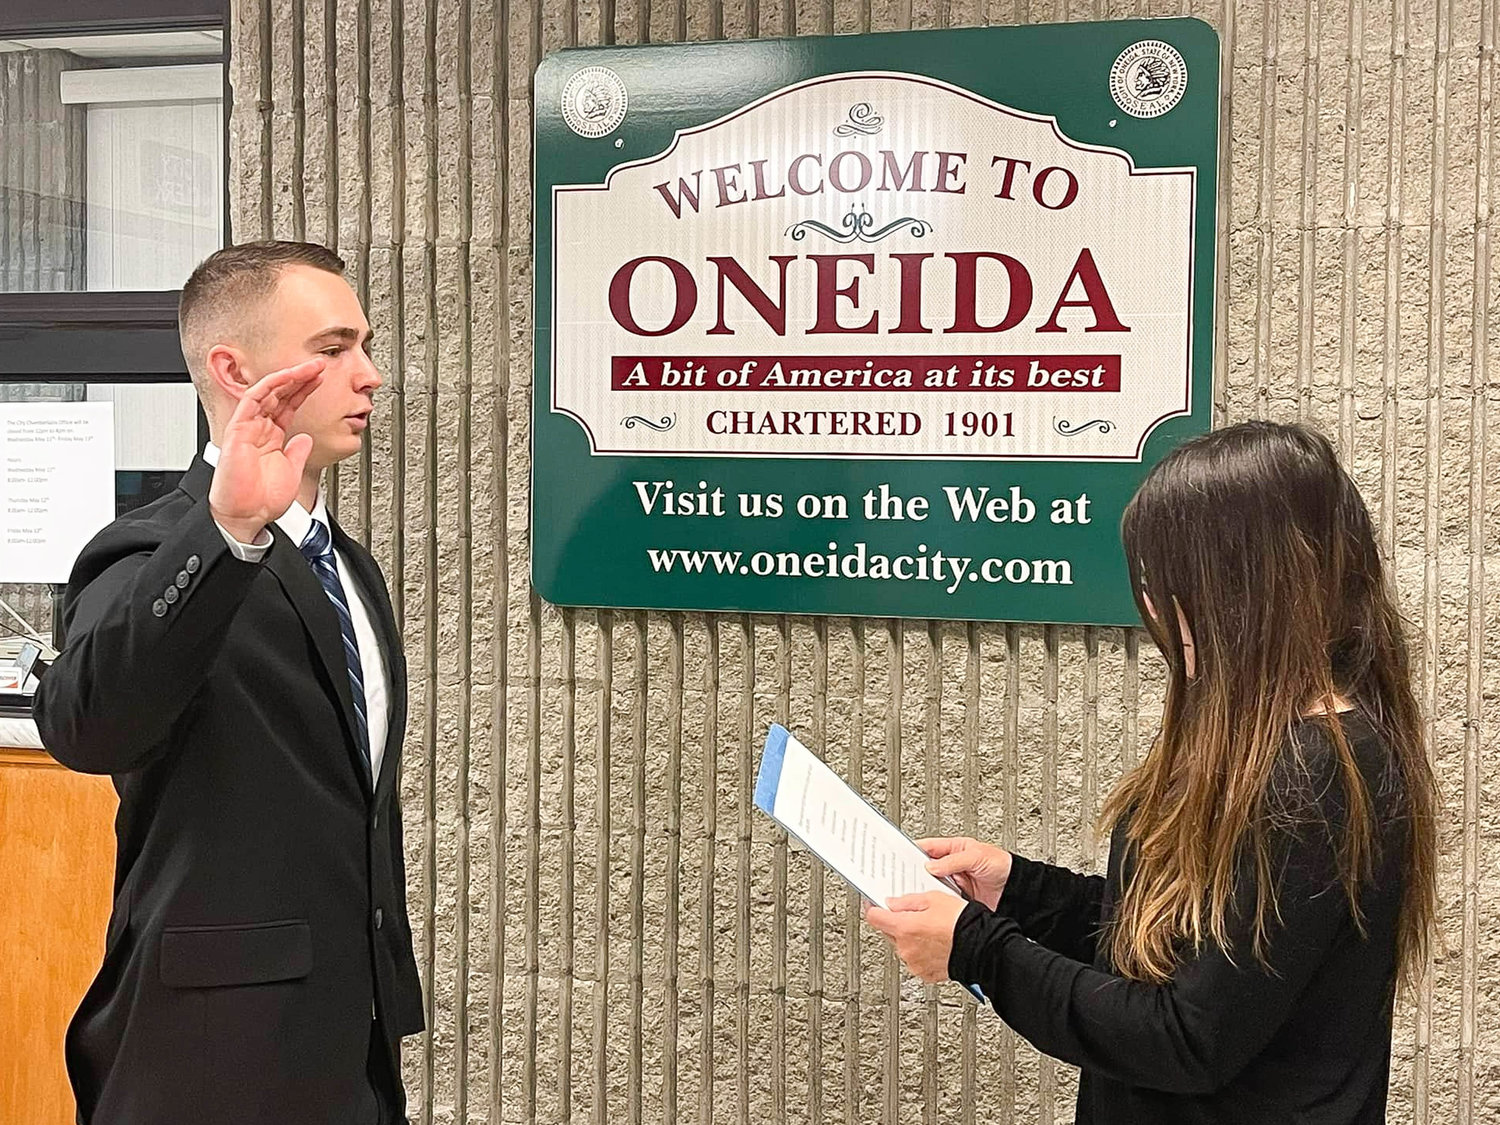 NEW ONEIDA POLICE OFFICER — Oneida Police Officer Nicholas Weber was sworn into service Monday morning in the City of Oneida, according to police officials. Weber will attend the second phase of the Police Academy before he begins in-field service. Authorities said Weber is also a sergeant in the Army National Guard.